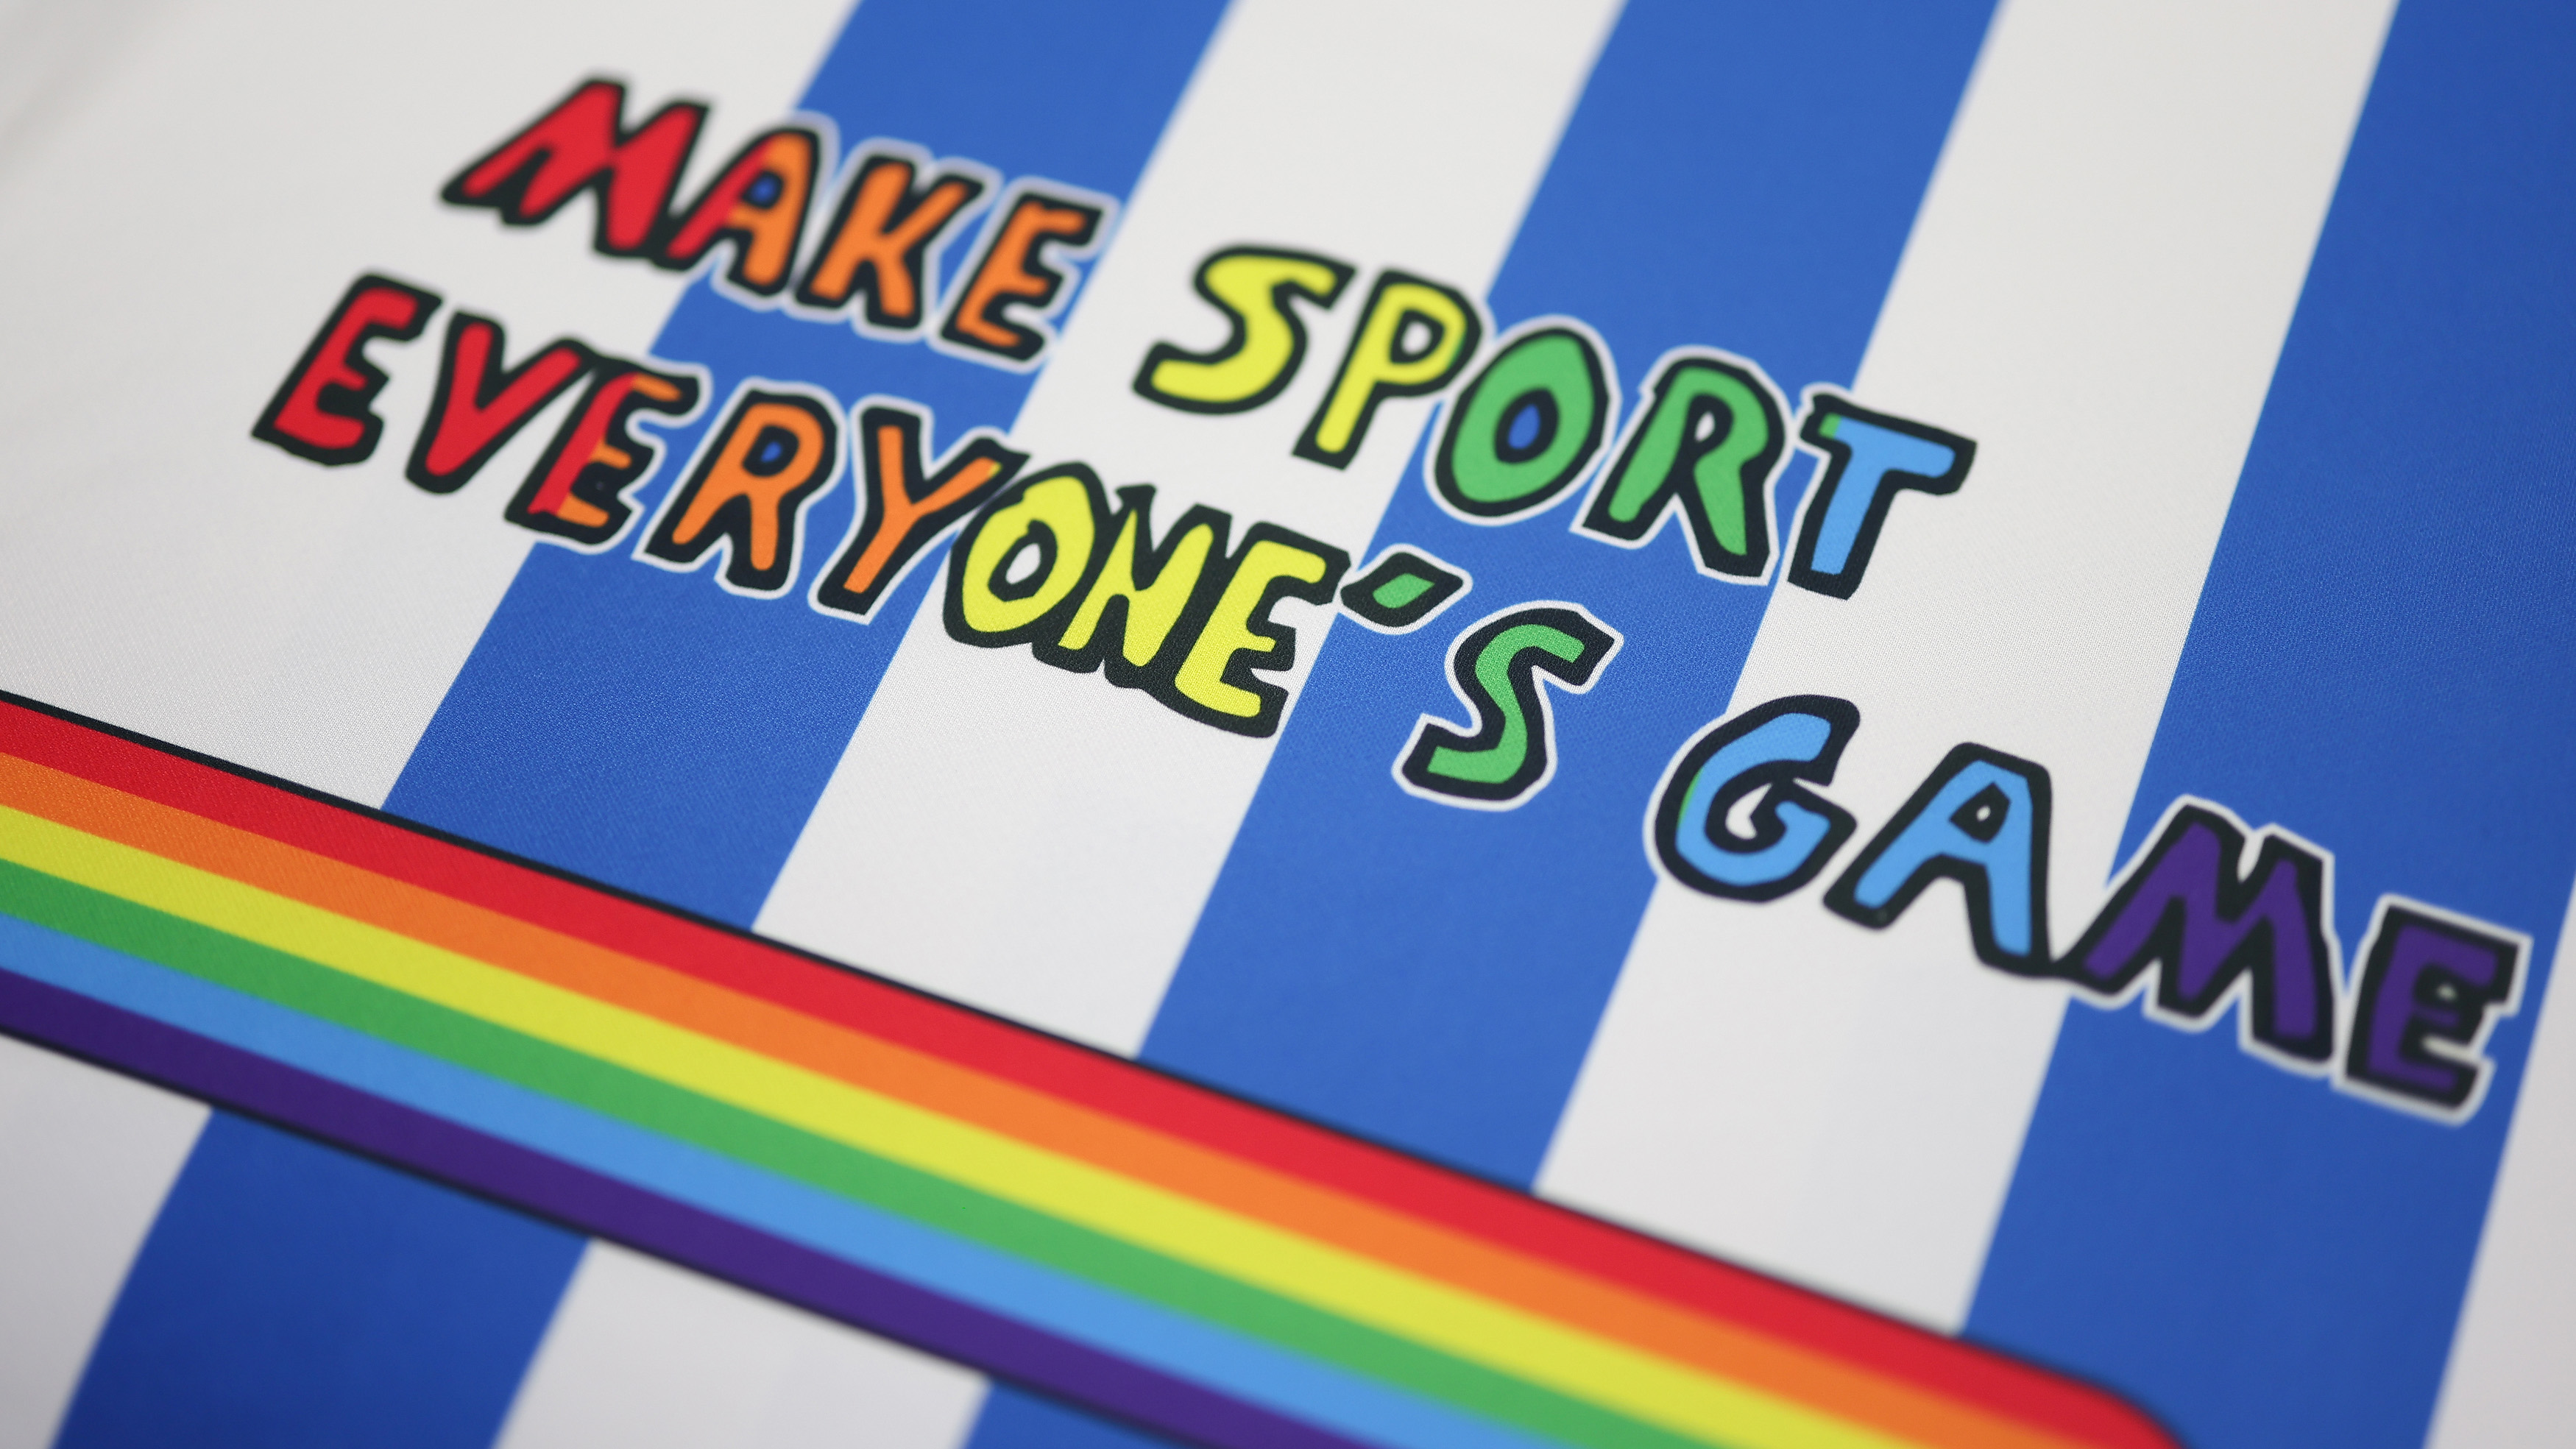 BHAFC Foundation spreads Rainbow Laces message across Sussex